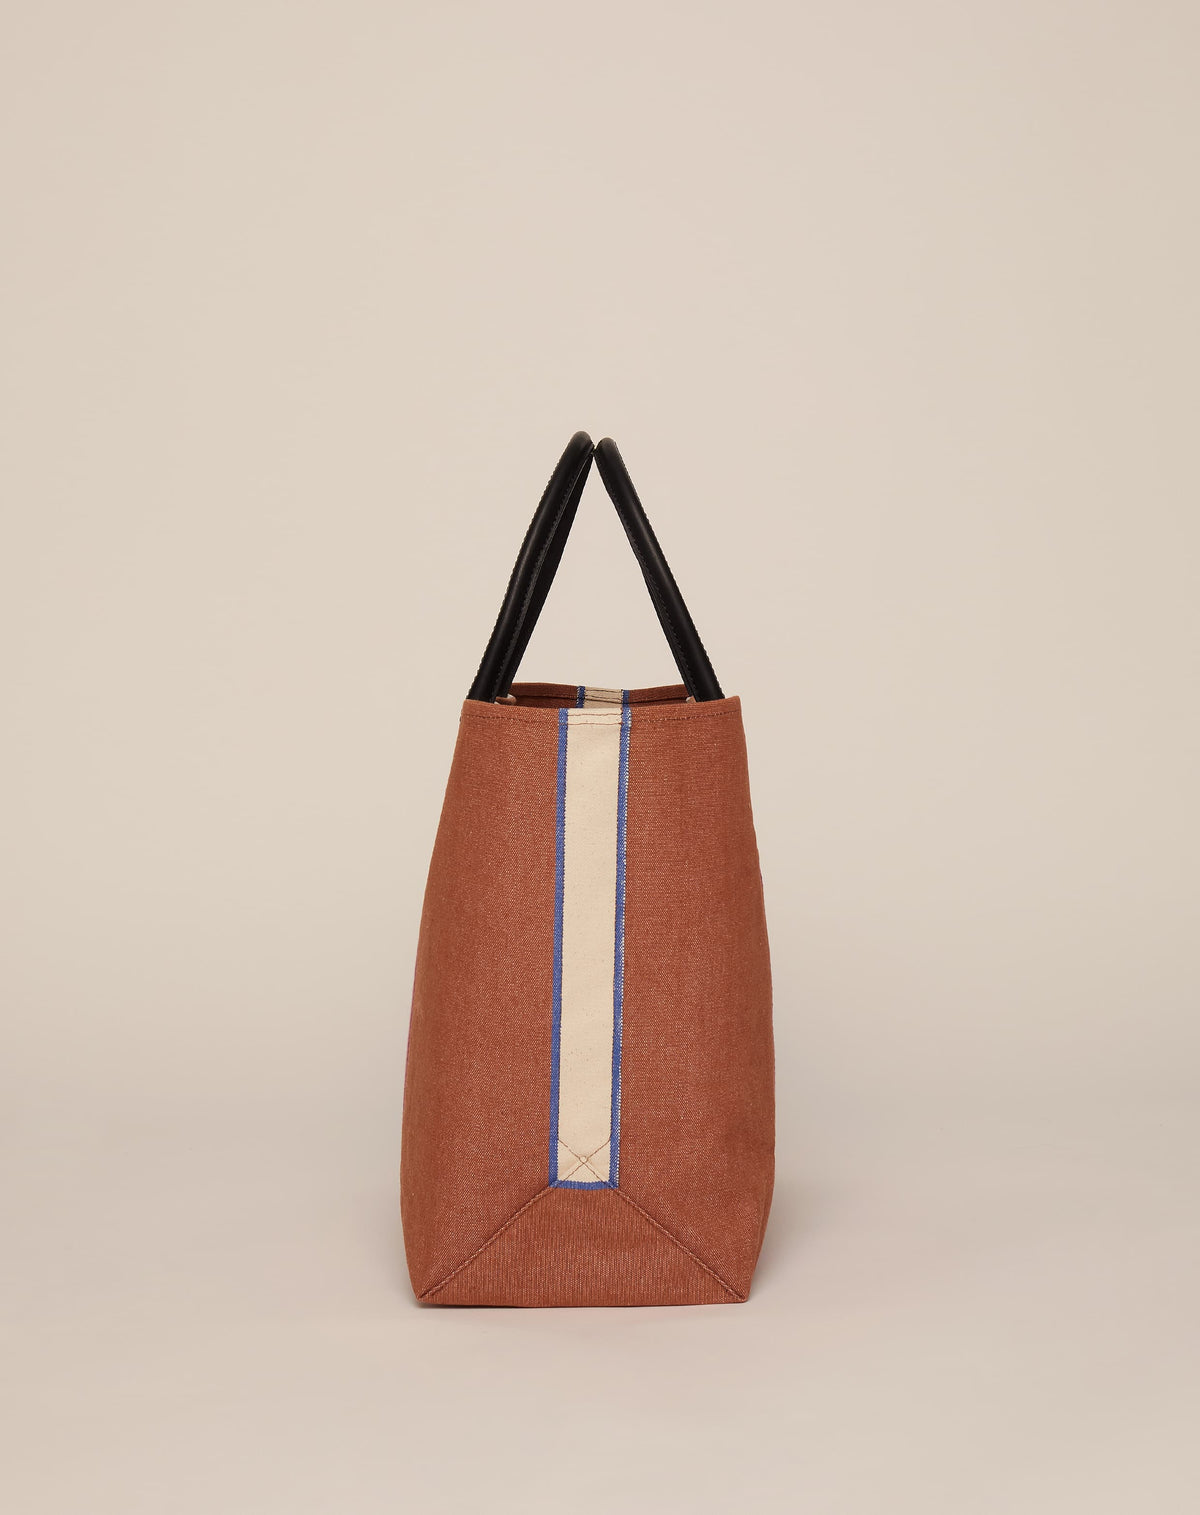 Large Utility Tote - Tan with Dusty Pink Webbing